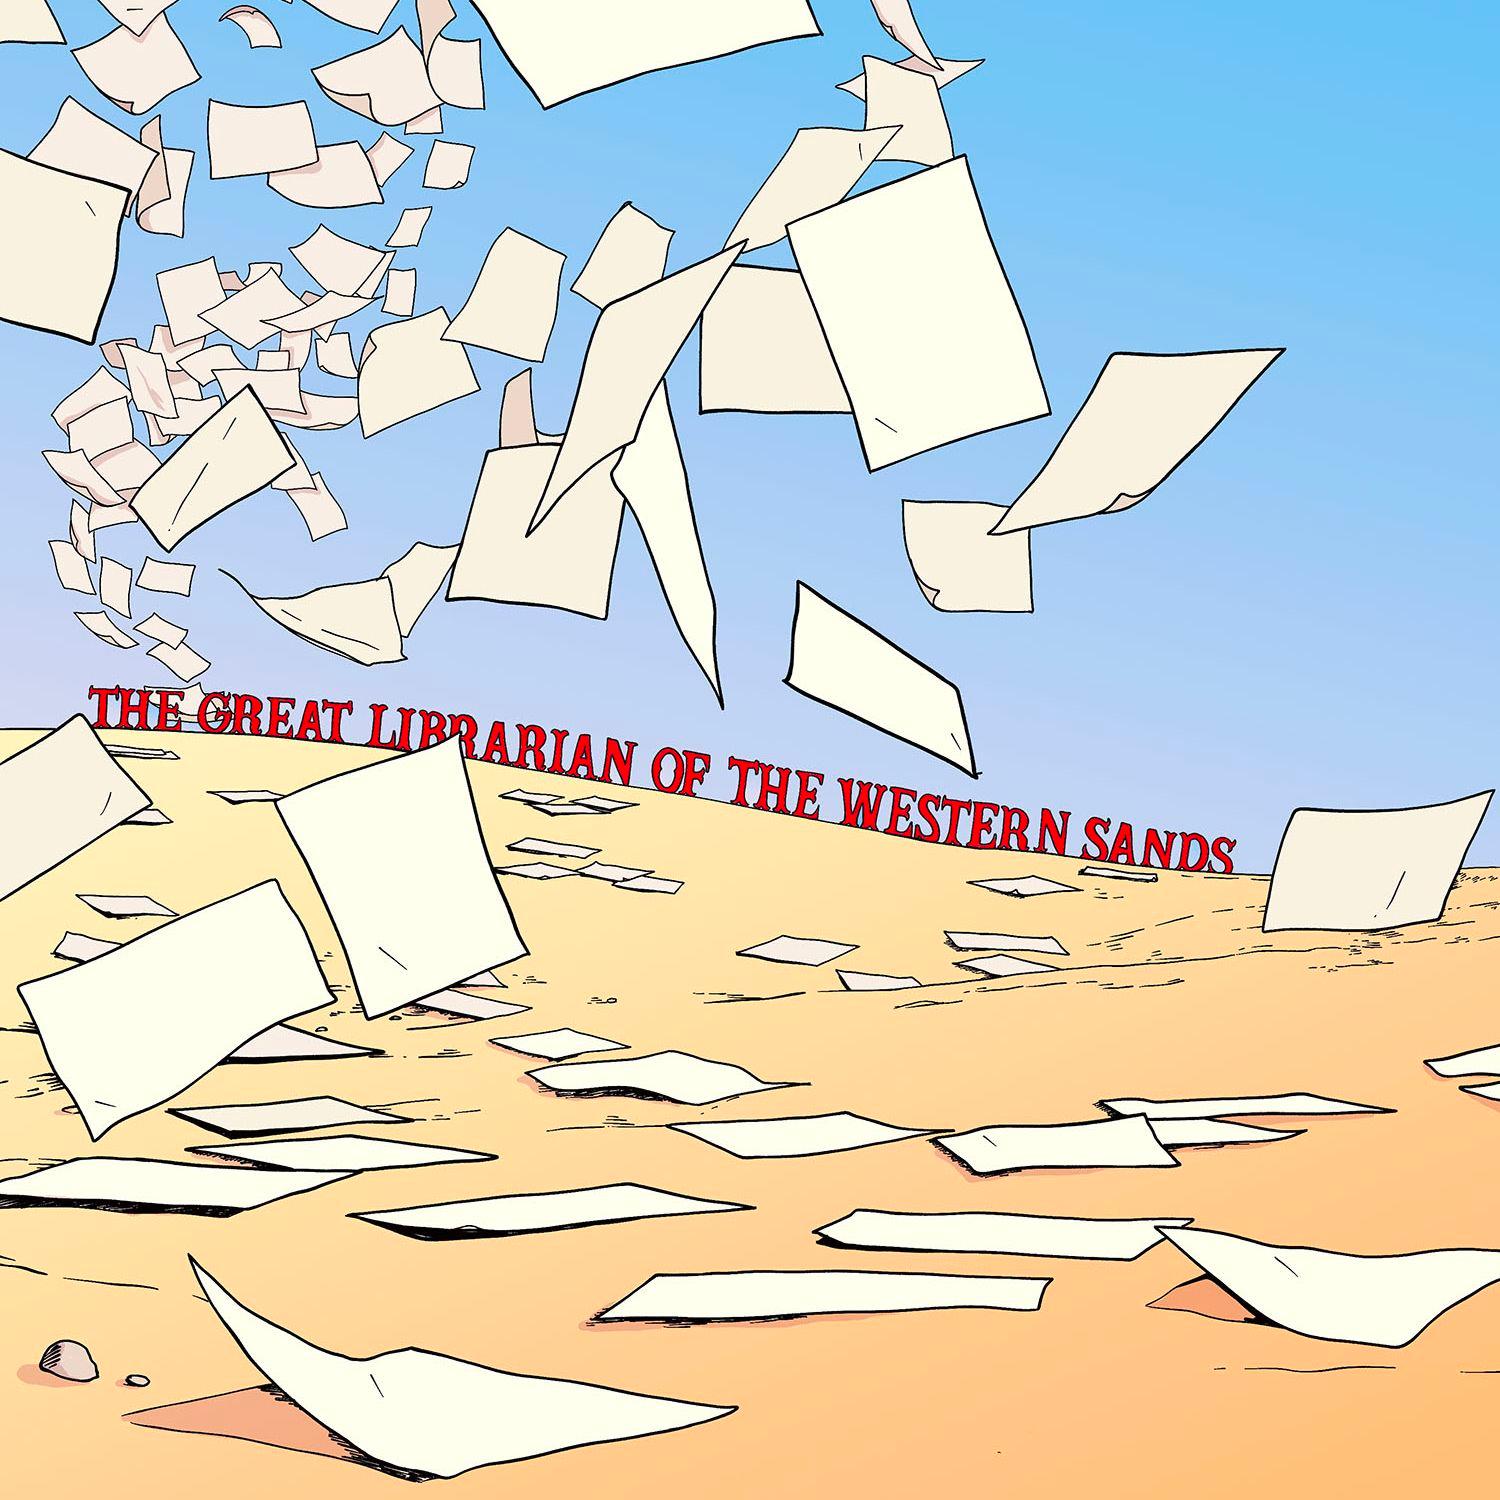 Thumbnail for "206 - The Great Librarian of the Western Sands".